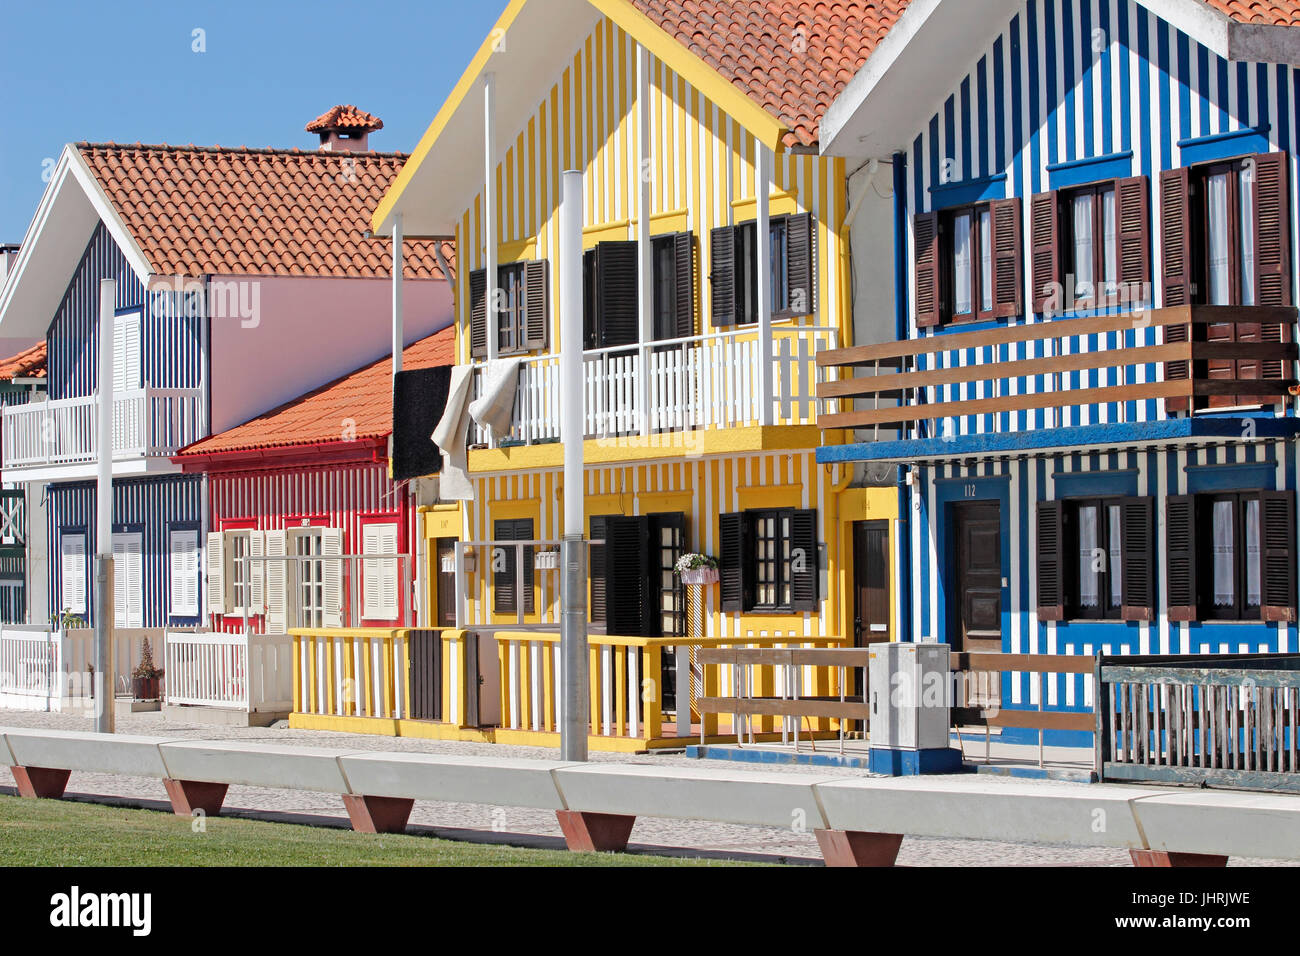 Colorful candy striped cottages in Costa Nova near Aveiro Portugal Stock Photo